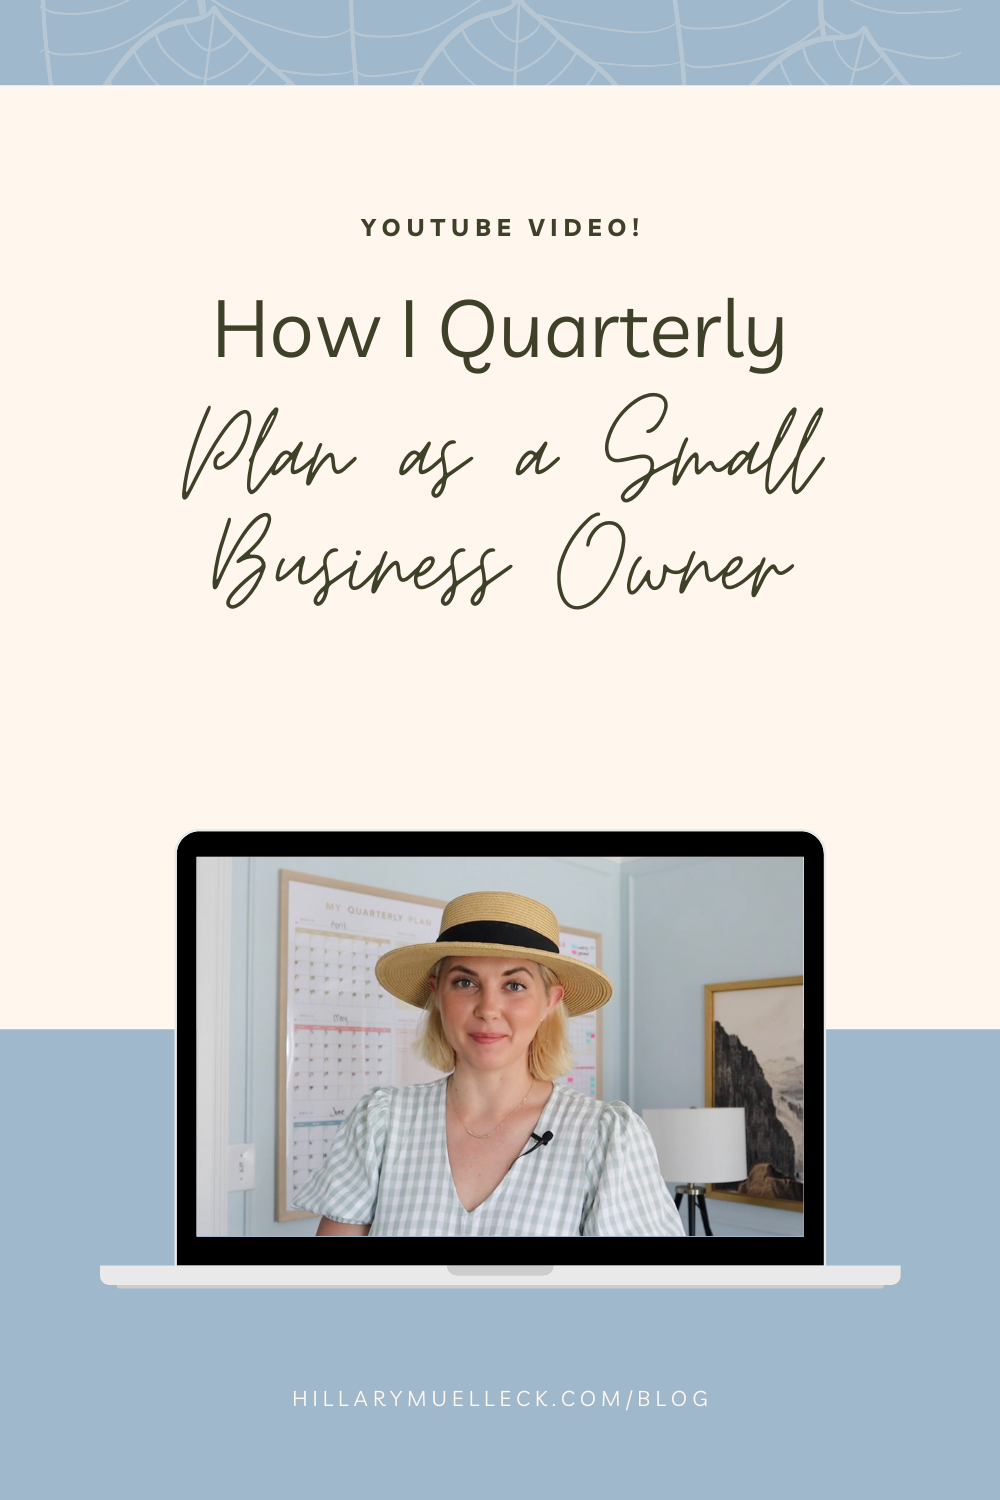 How I Quarterly Plan as a Business Owner: a step-by-step video showing how to quarterly plan for your life and business